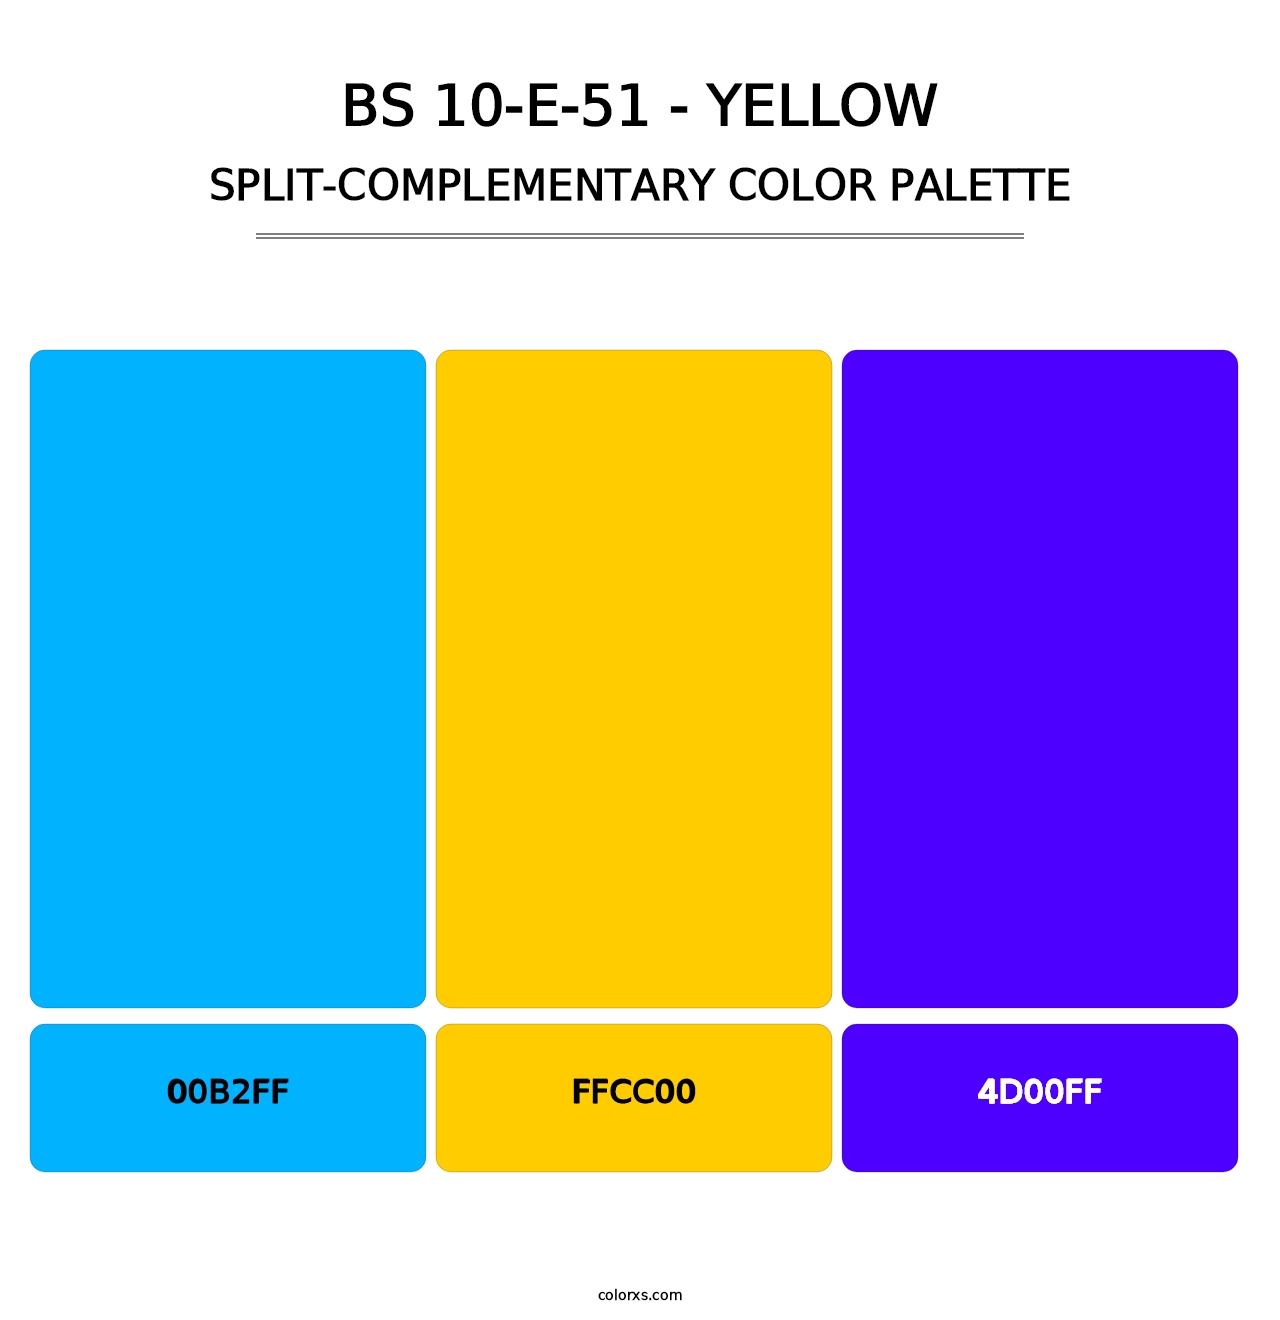 BS 10-E-51 - Yellow - Split-Complementary Color Palette